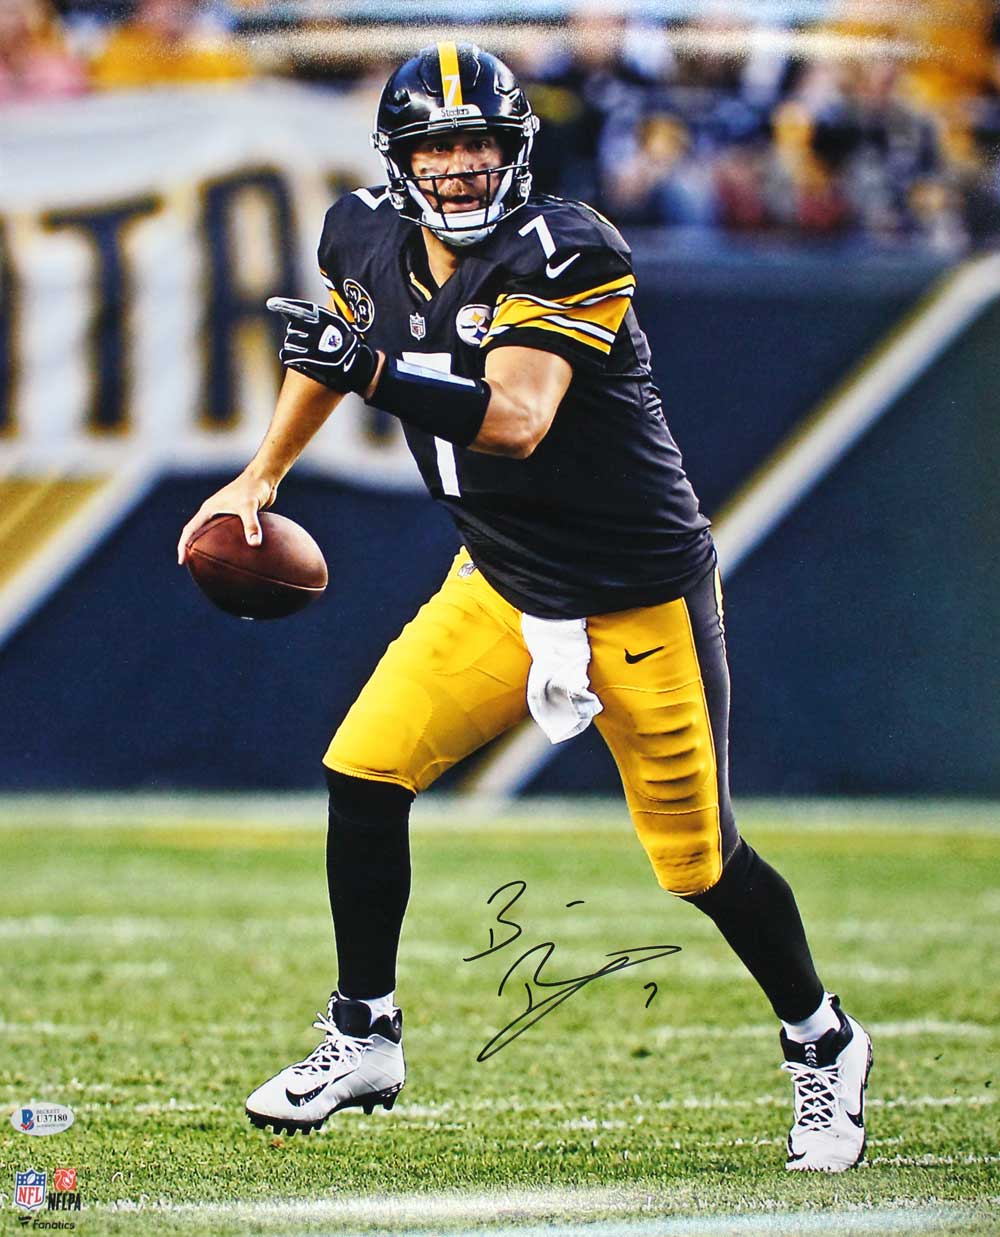 Ben Roethlisberger Autographed/Signed Pittsburgh Steelers 16x20 Photo BAS 29967